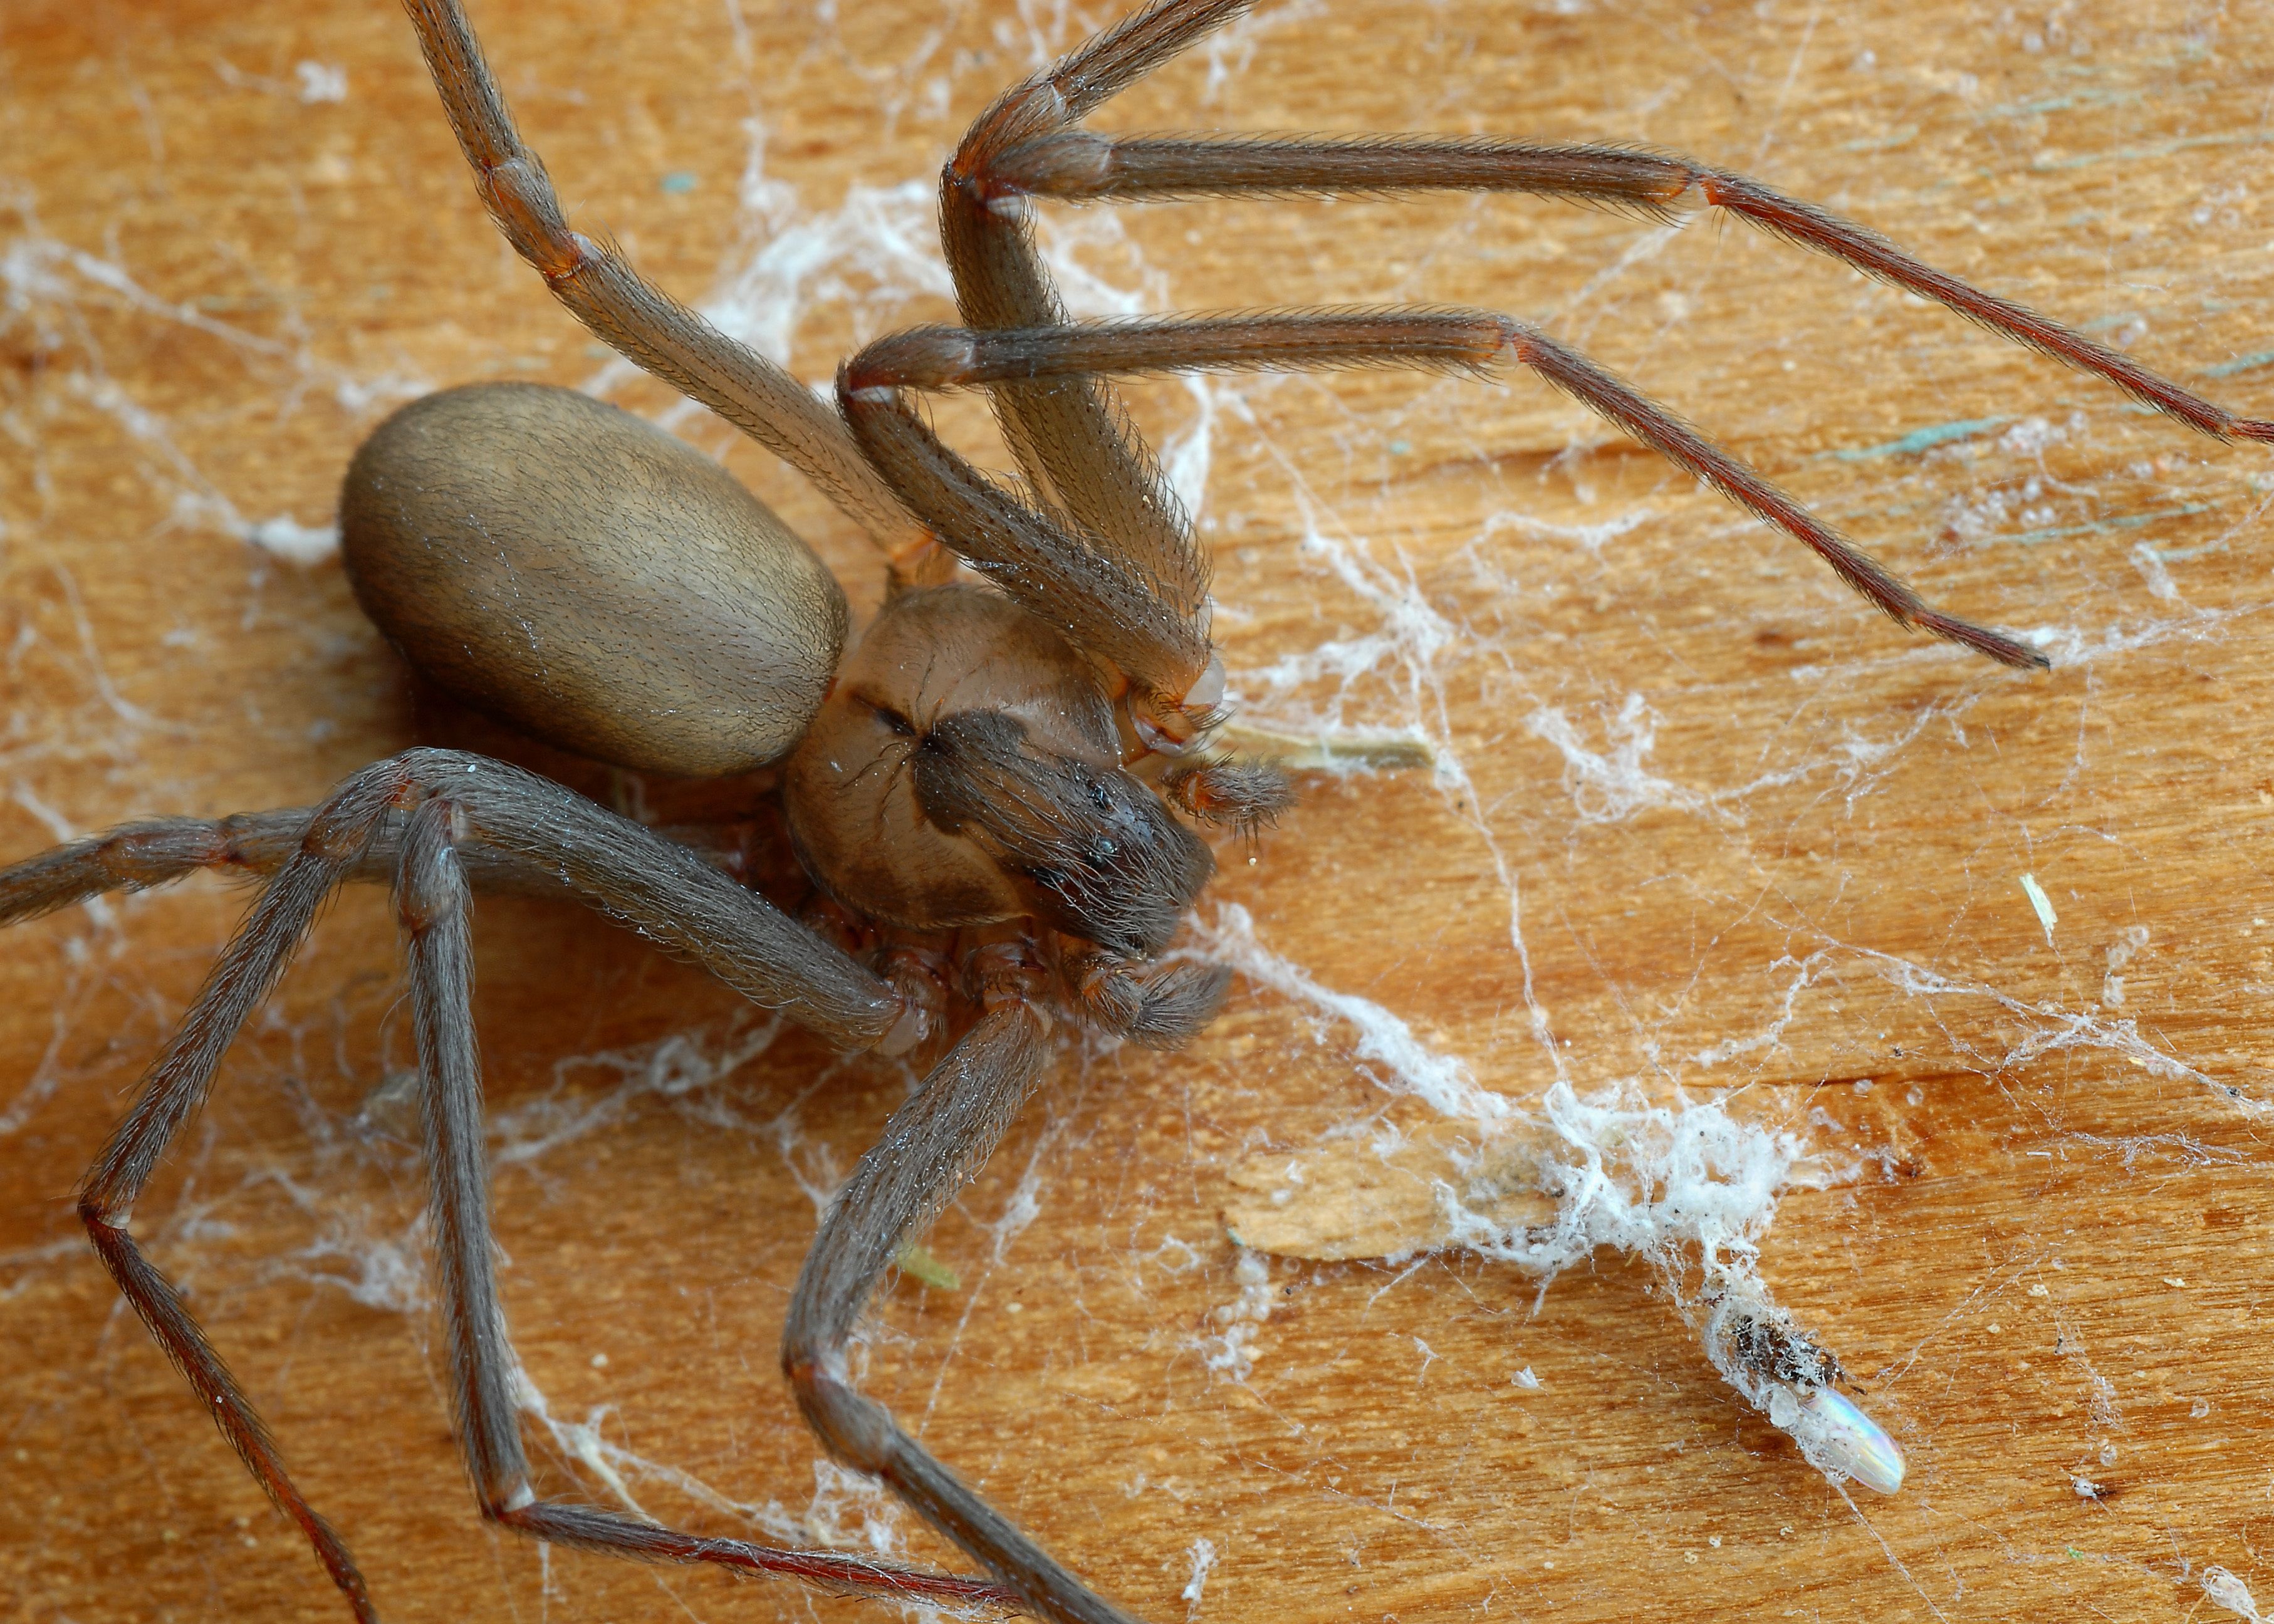 A Brown Recluse Spider Bit Me - Now What?